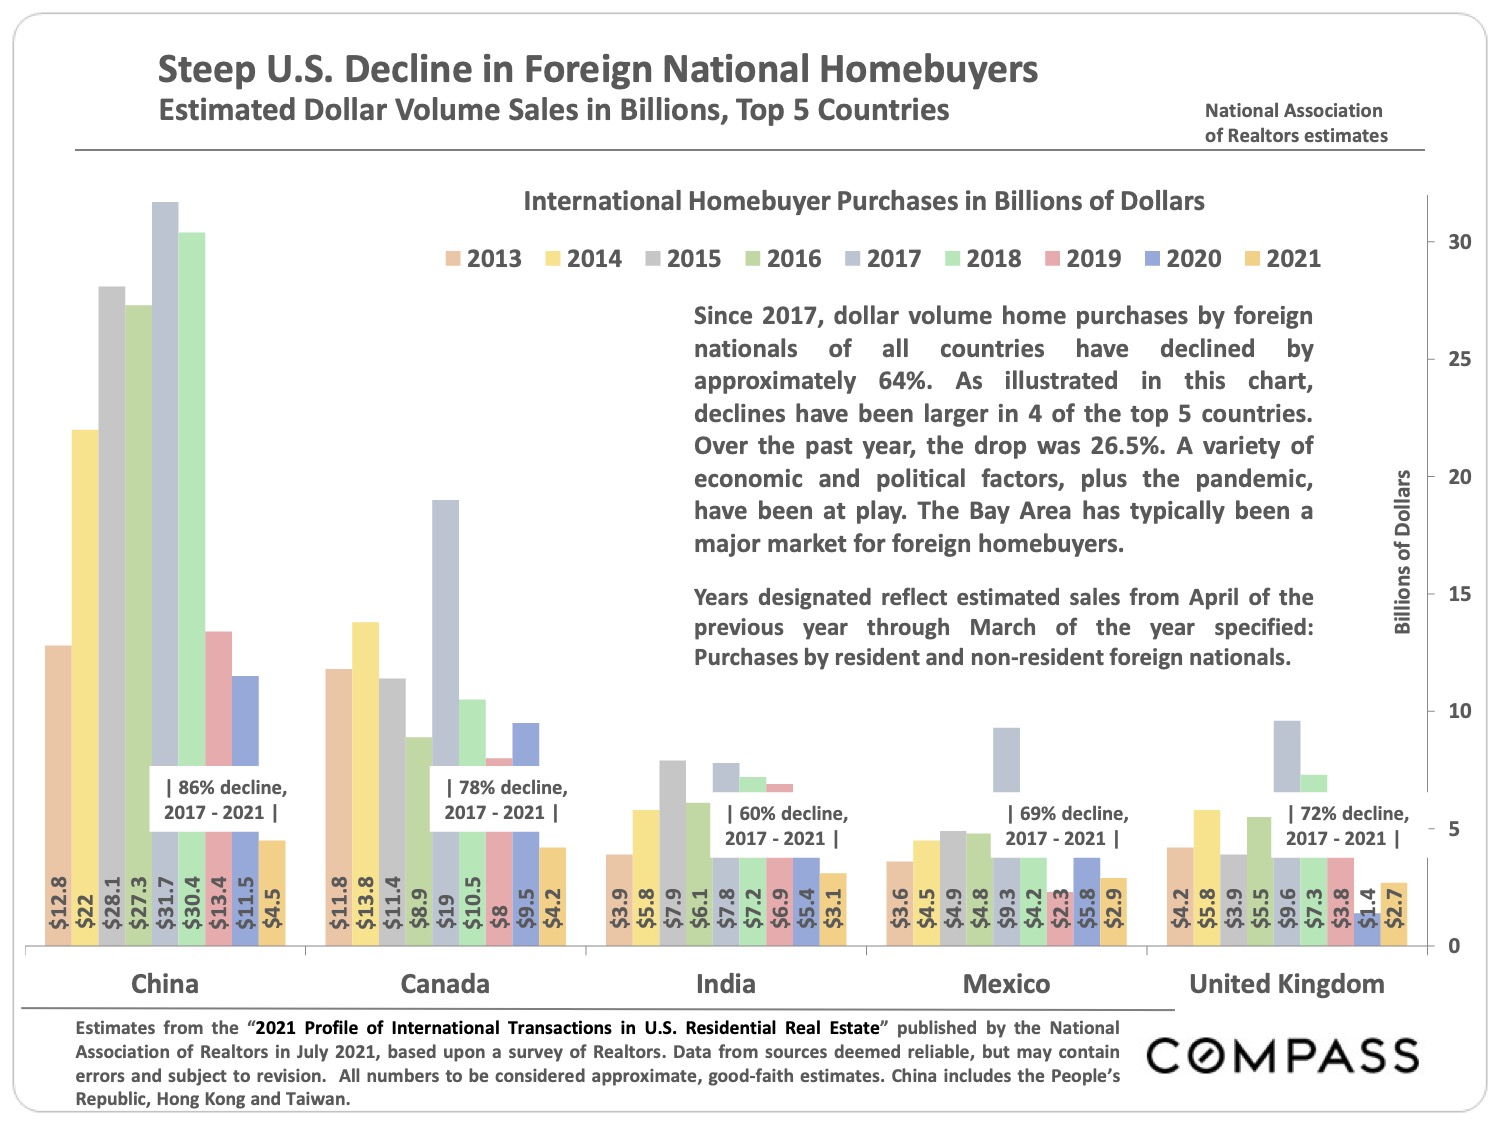 Image showing the Steep US Decline in Foreign National Homebuyers Estimated Dollar Volume Sales in Billions Top 5 Countries